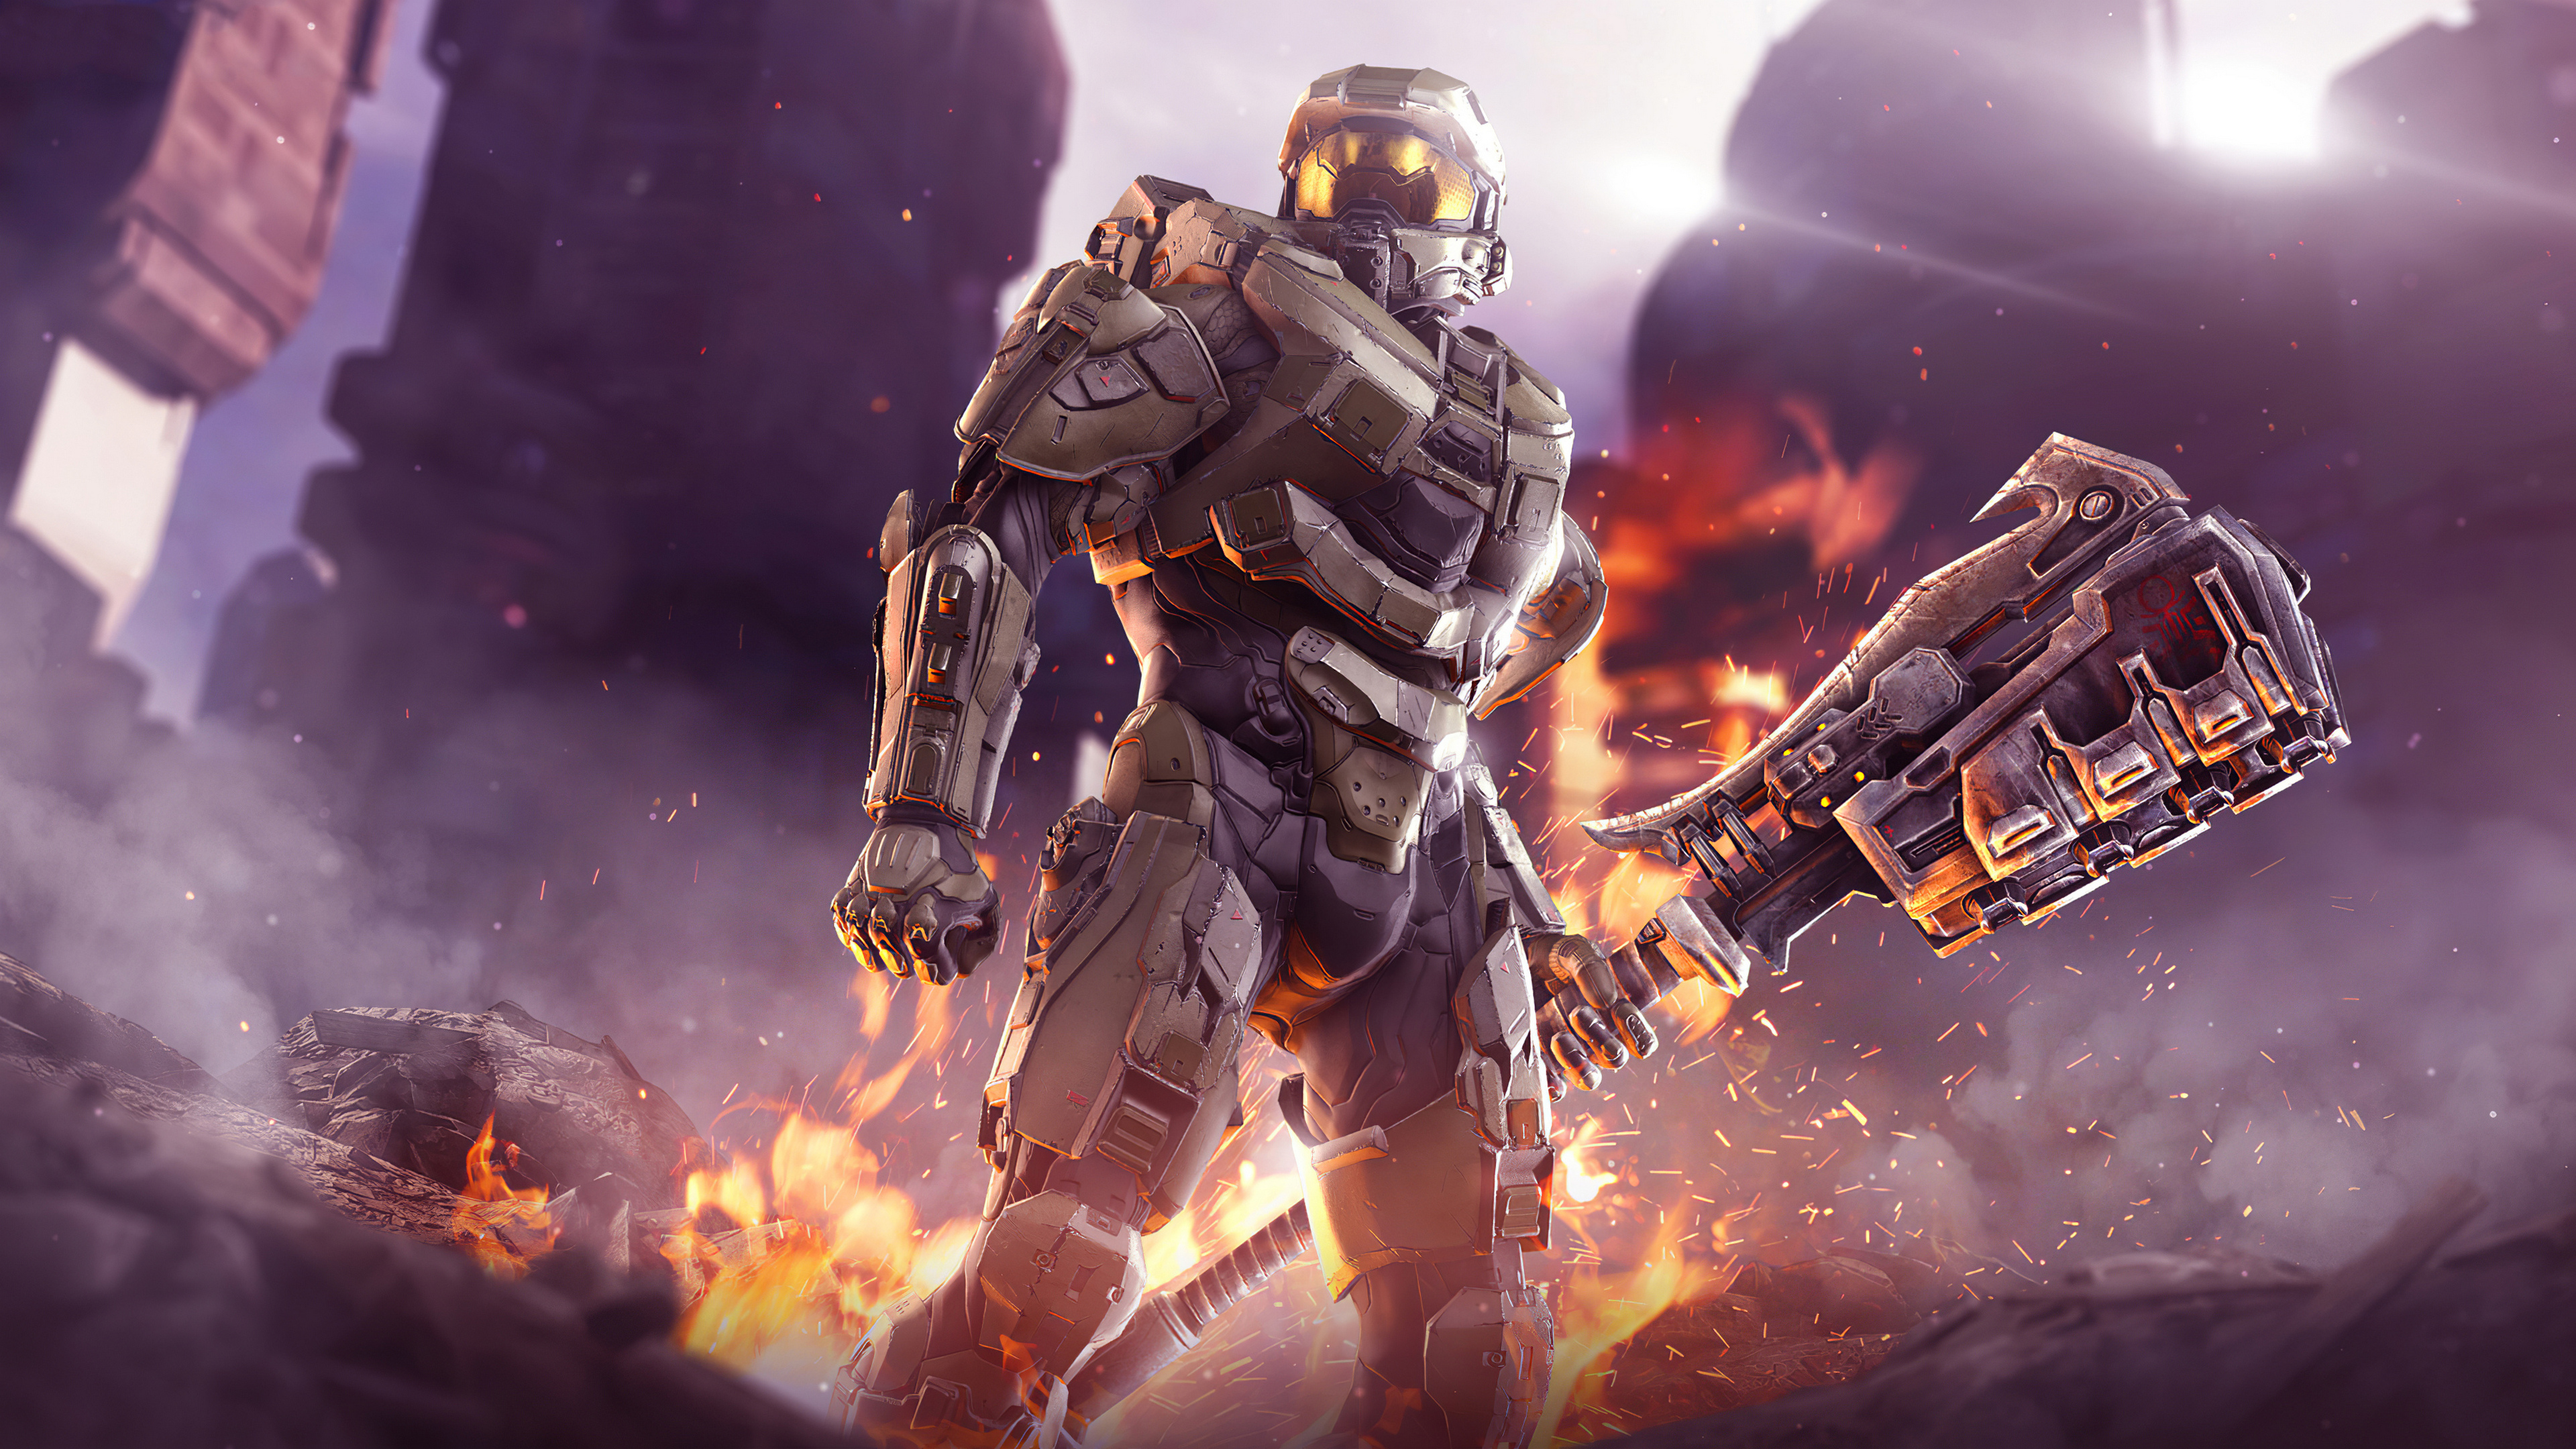 Halo Video Games Video Game Art Artwork Weapon Science Fiction Armor Video Game Characters Master Ch 3840x2160